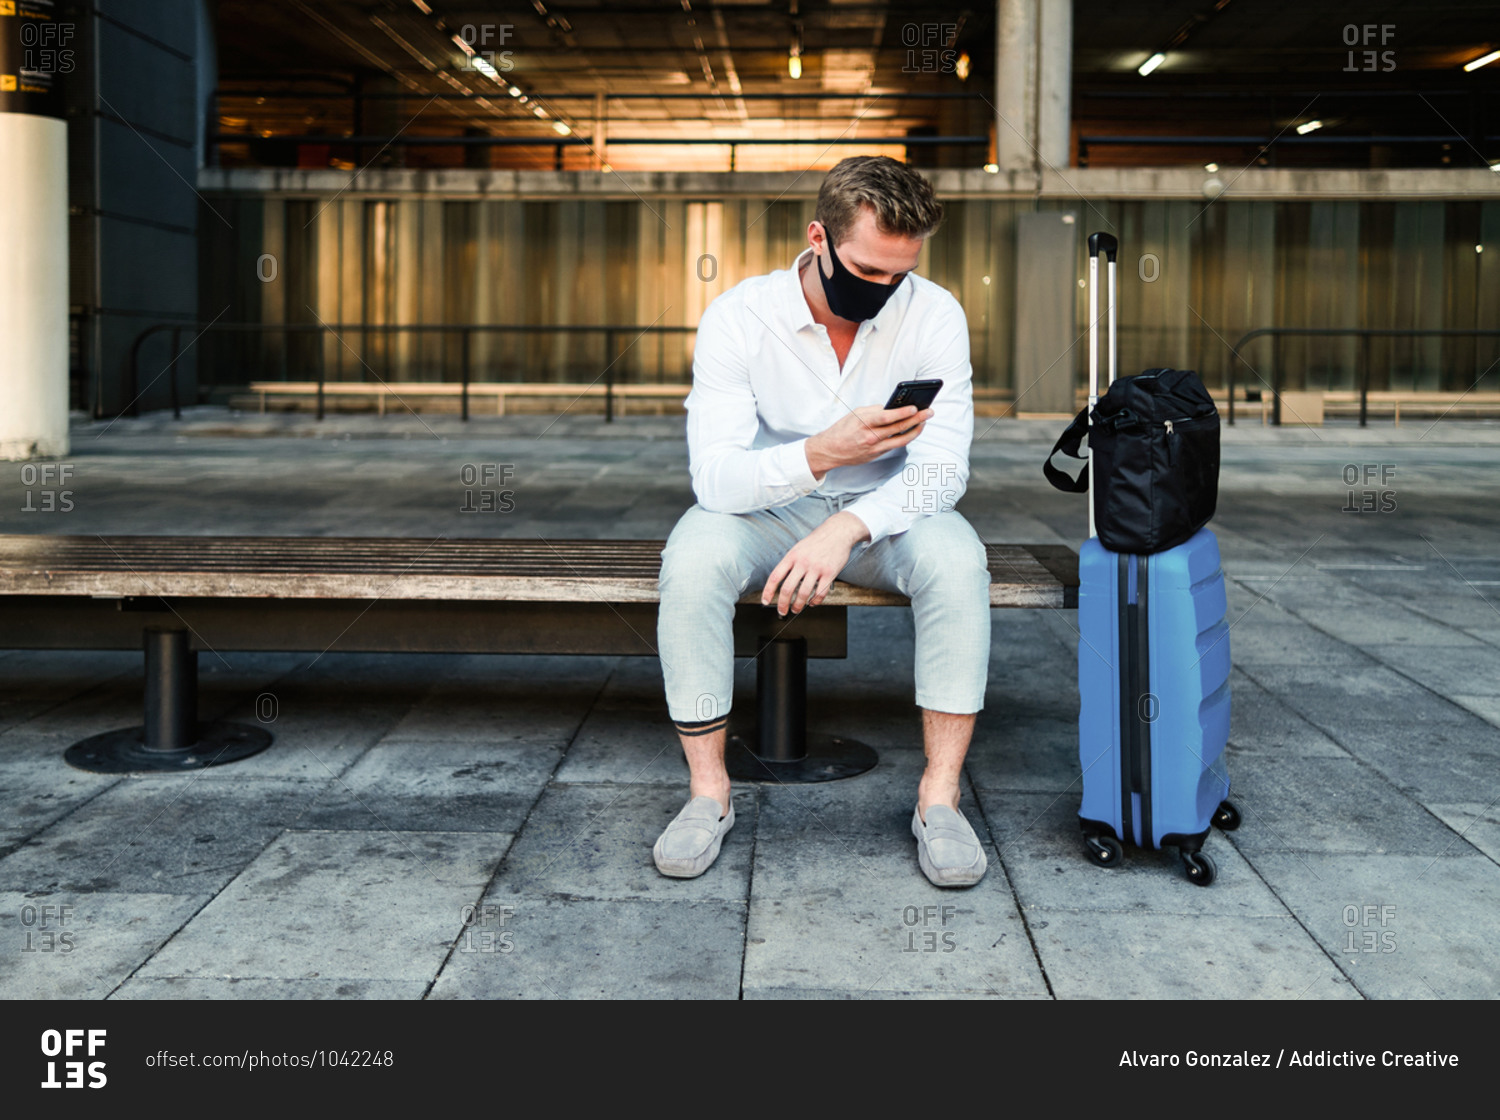 Calm male tourist in protective mask and with luggage sitting on bench in airport and using smartphone before departure during coronavirus pandemic